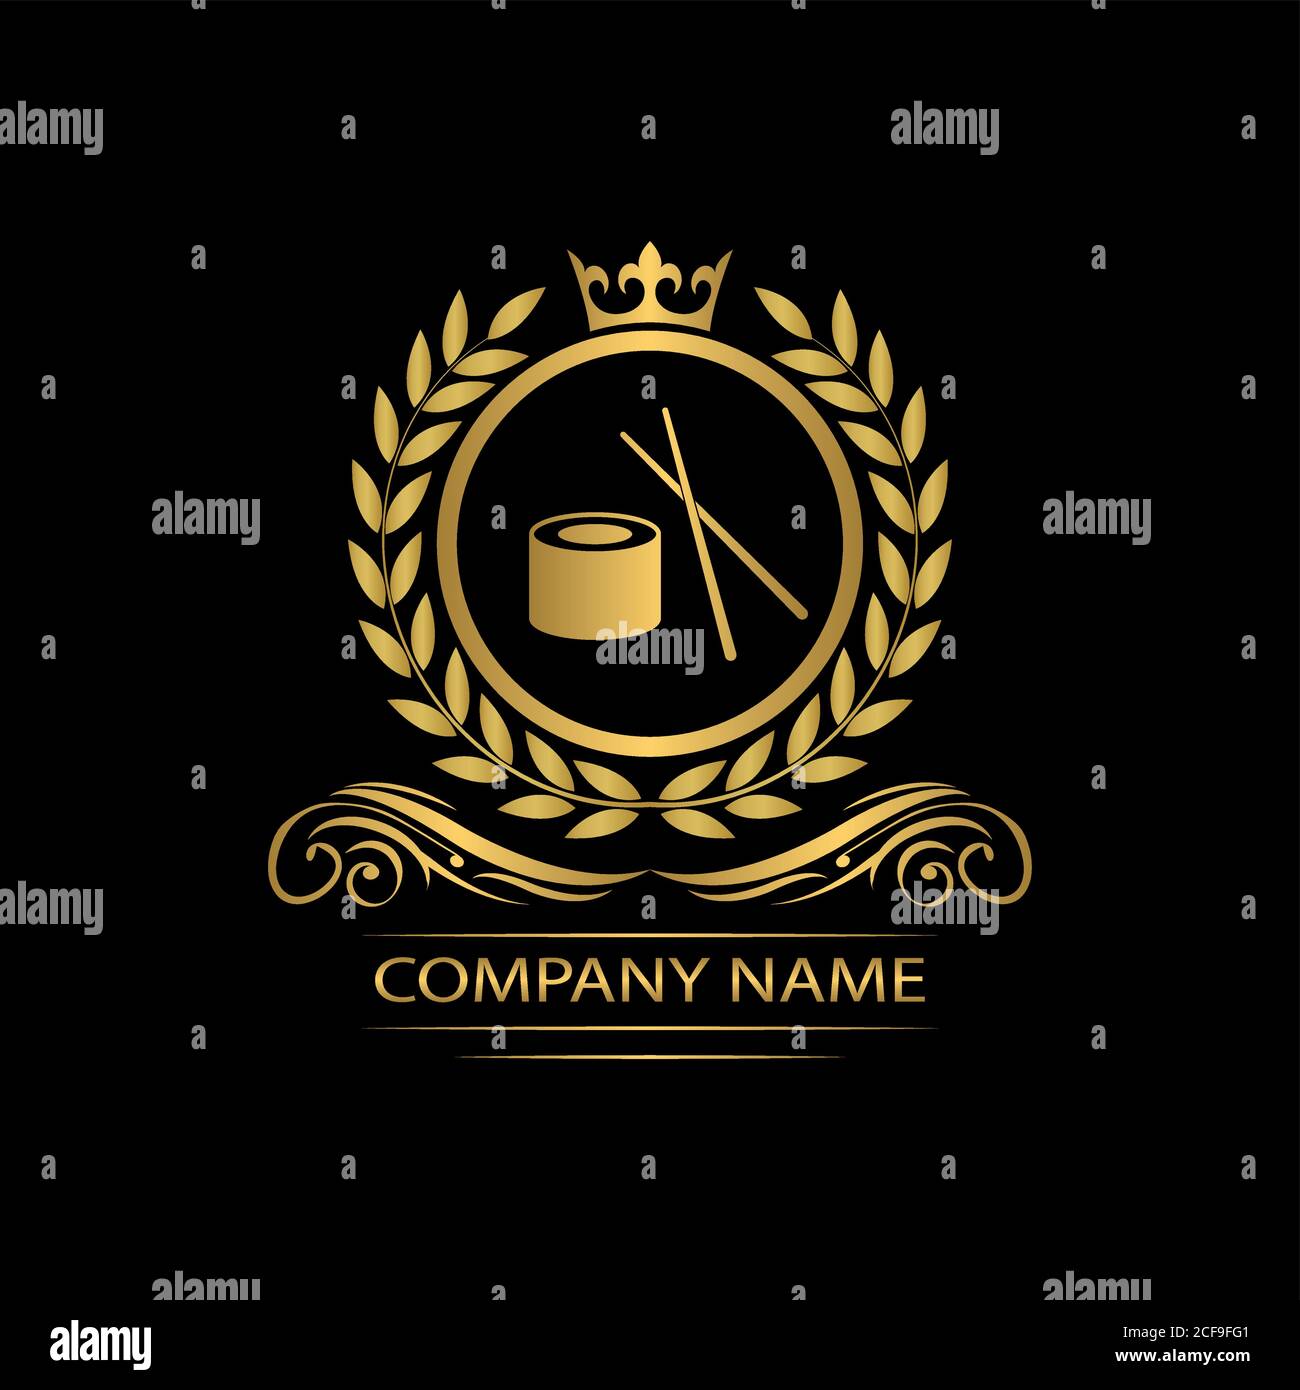 sushi logo template luxury royal restaurant vector company decorative emblem with crown Stock Vector